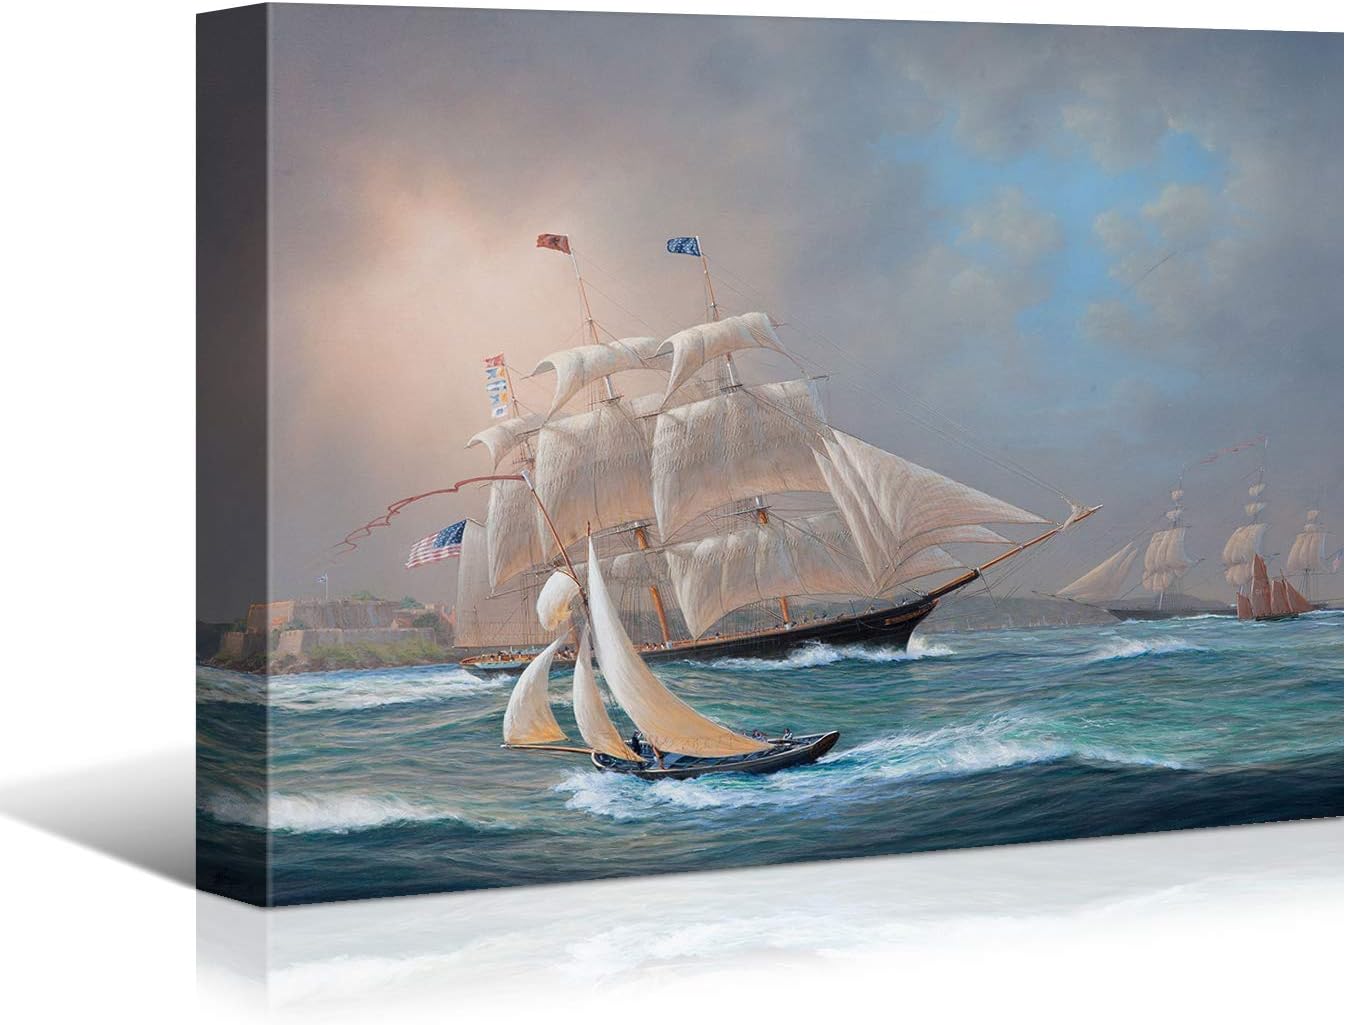 Sailing Ships Canvas Art by Brusheslife - Ocean Themed Wall Decor for Home, Hotel, and Bathroom